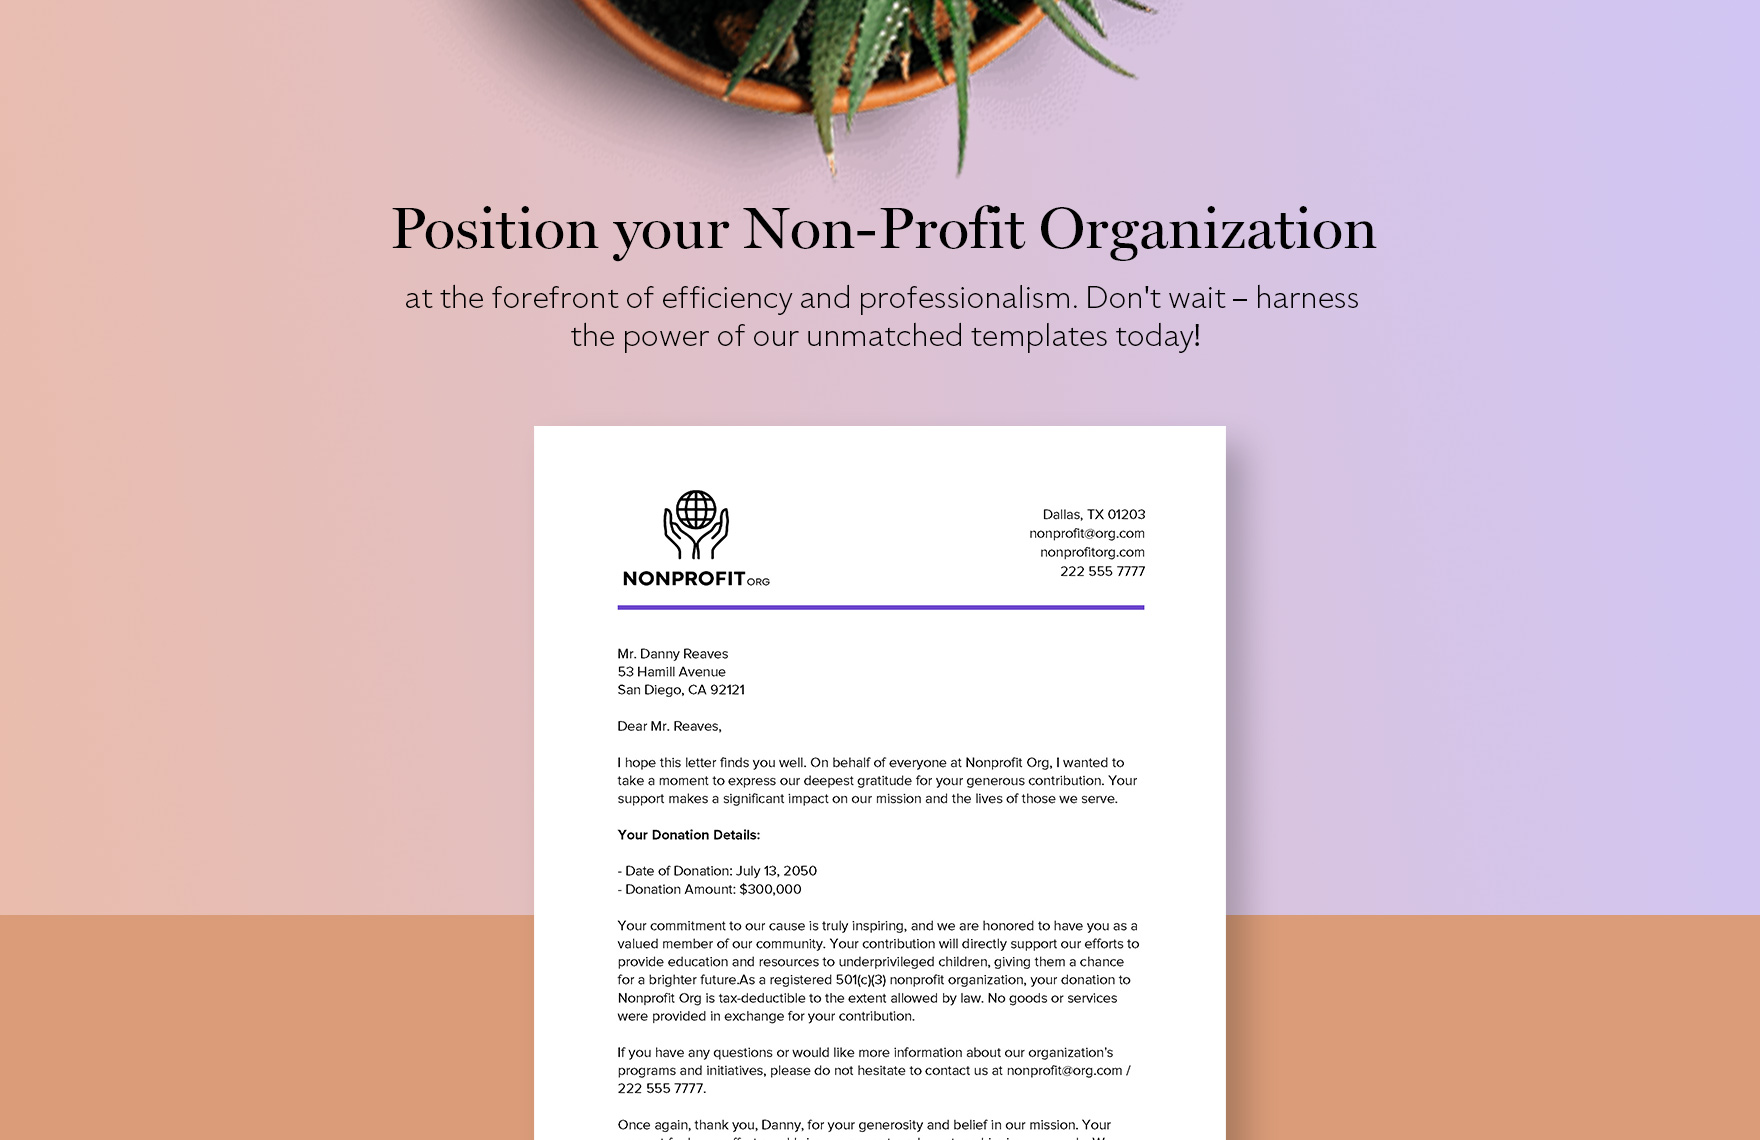 Nonprofit Organization Donor Acknowledgment Letter Template